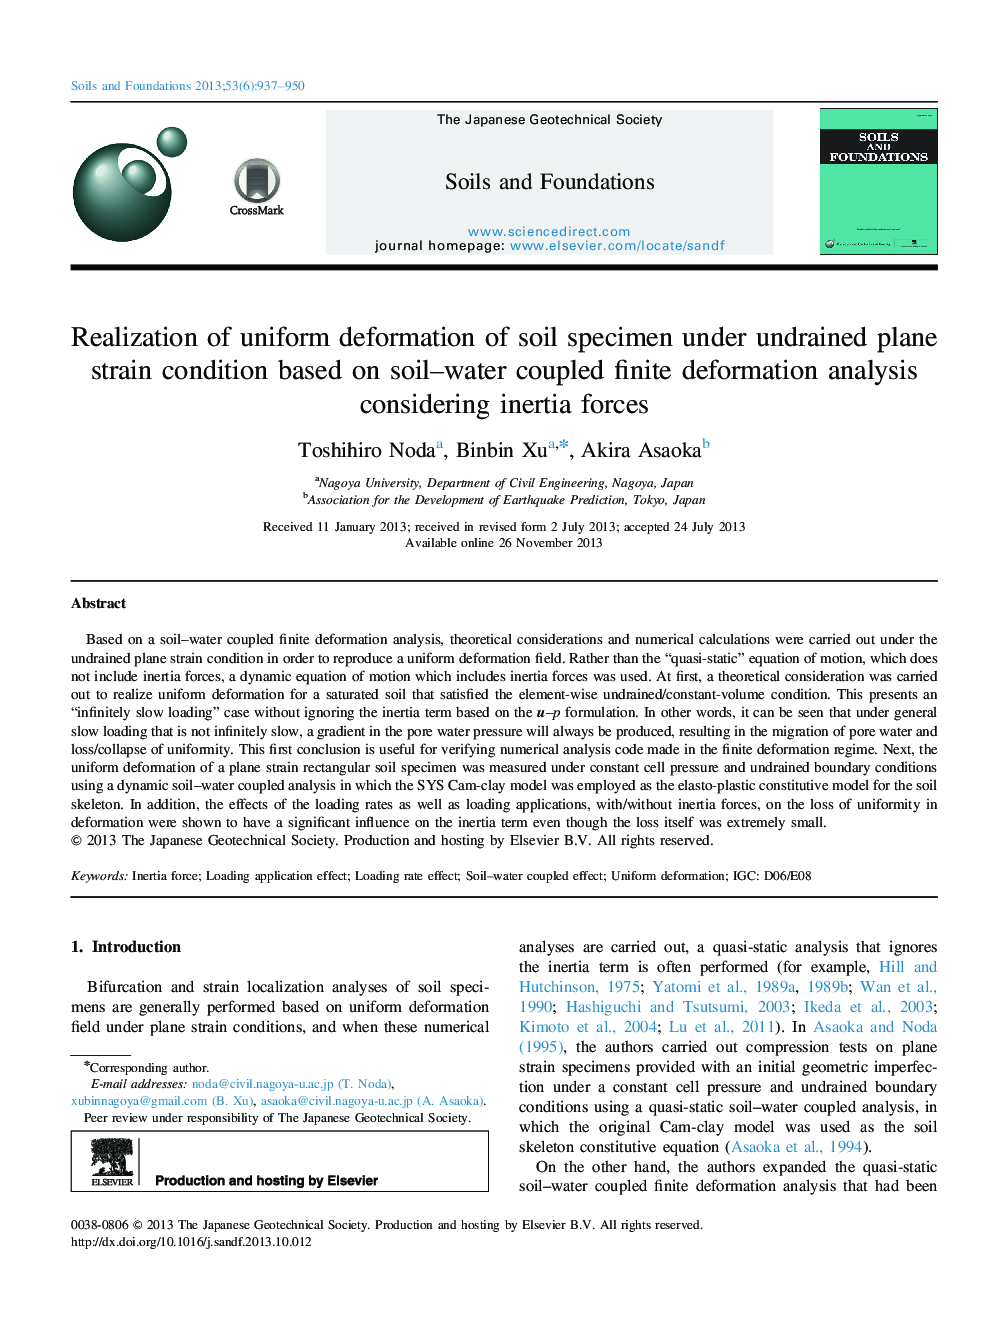 Realization of uniform deformation of soil specimen under undrained plane strain condition based on soil–water coupled finite deformation analysis considering inertia forces 